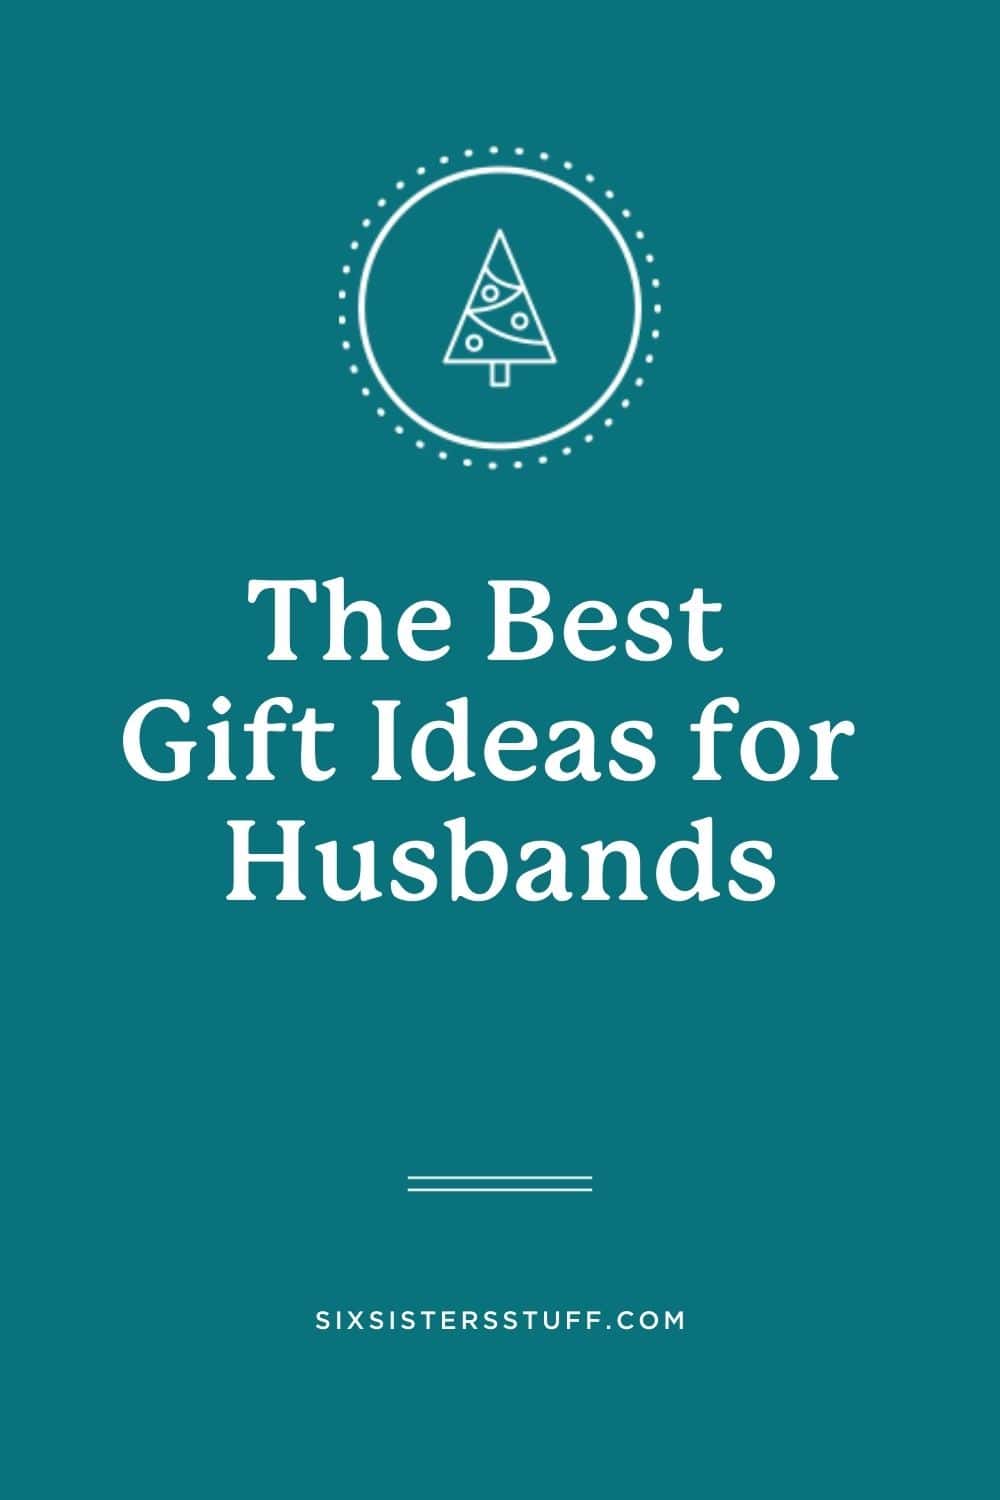 The Best Gift Ideas for Husbands (Sentimental gifts included!)